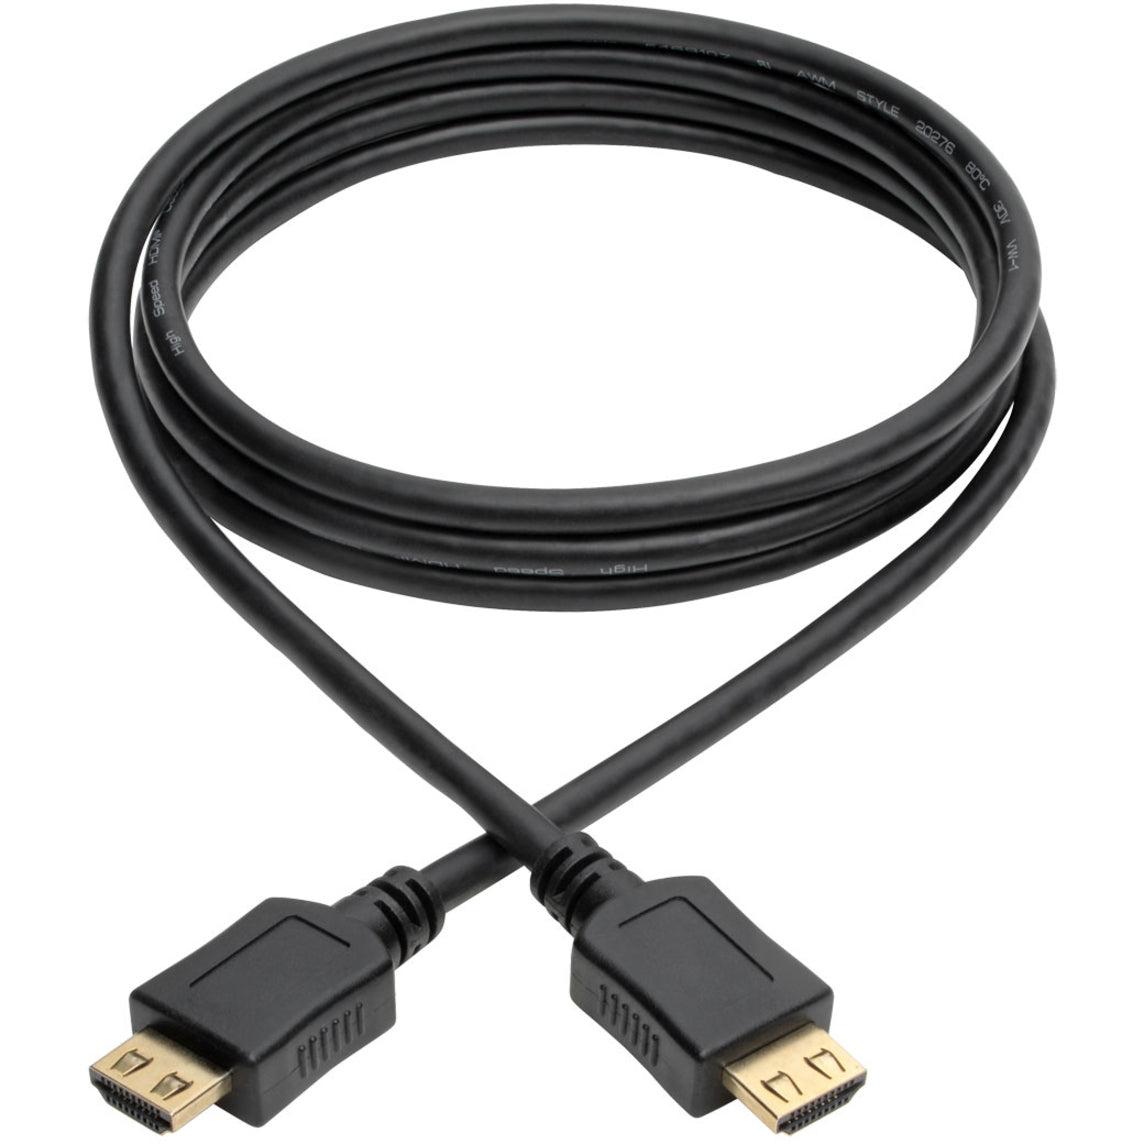 Tripp Lite P568-006-BK-GRP High-Speed HDMI Cable, 6 ft., with Gripping Connectors - 4K, Black